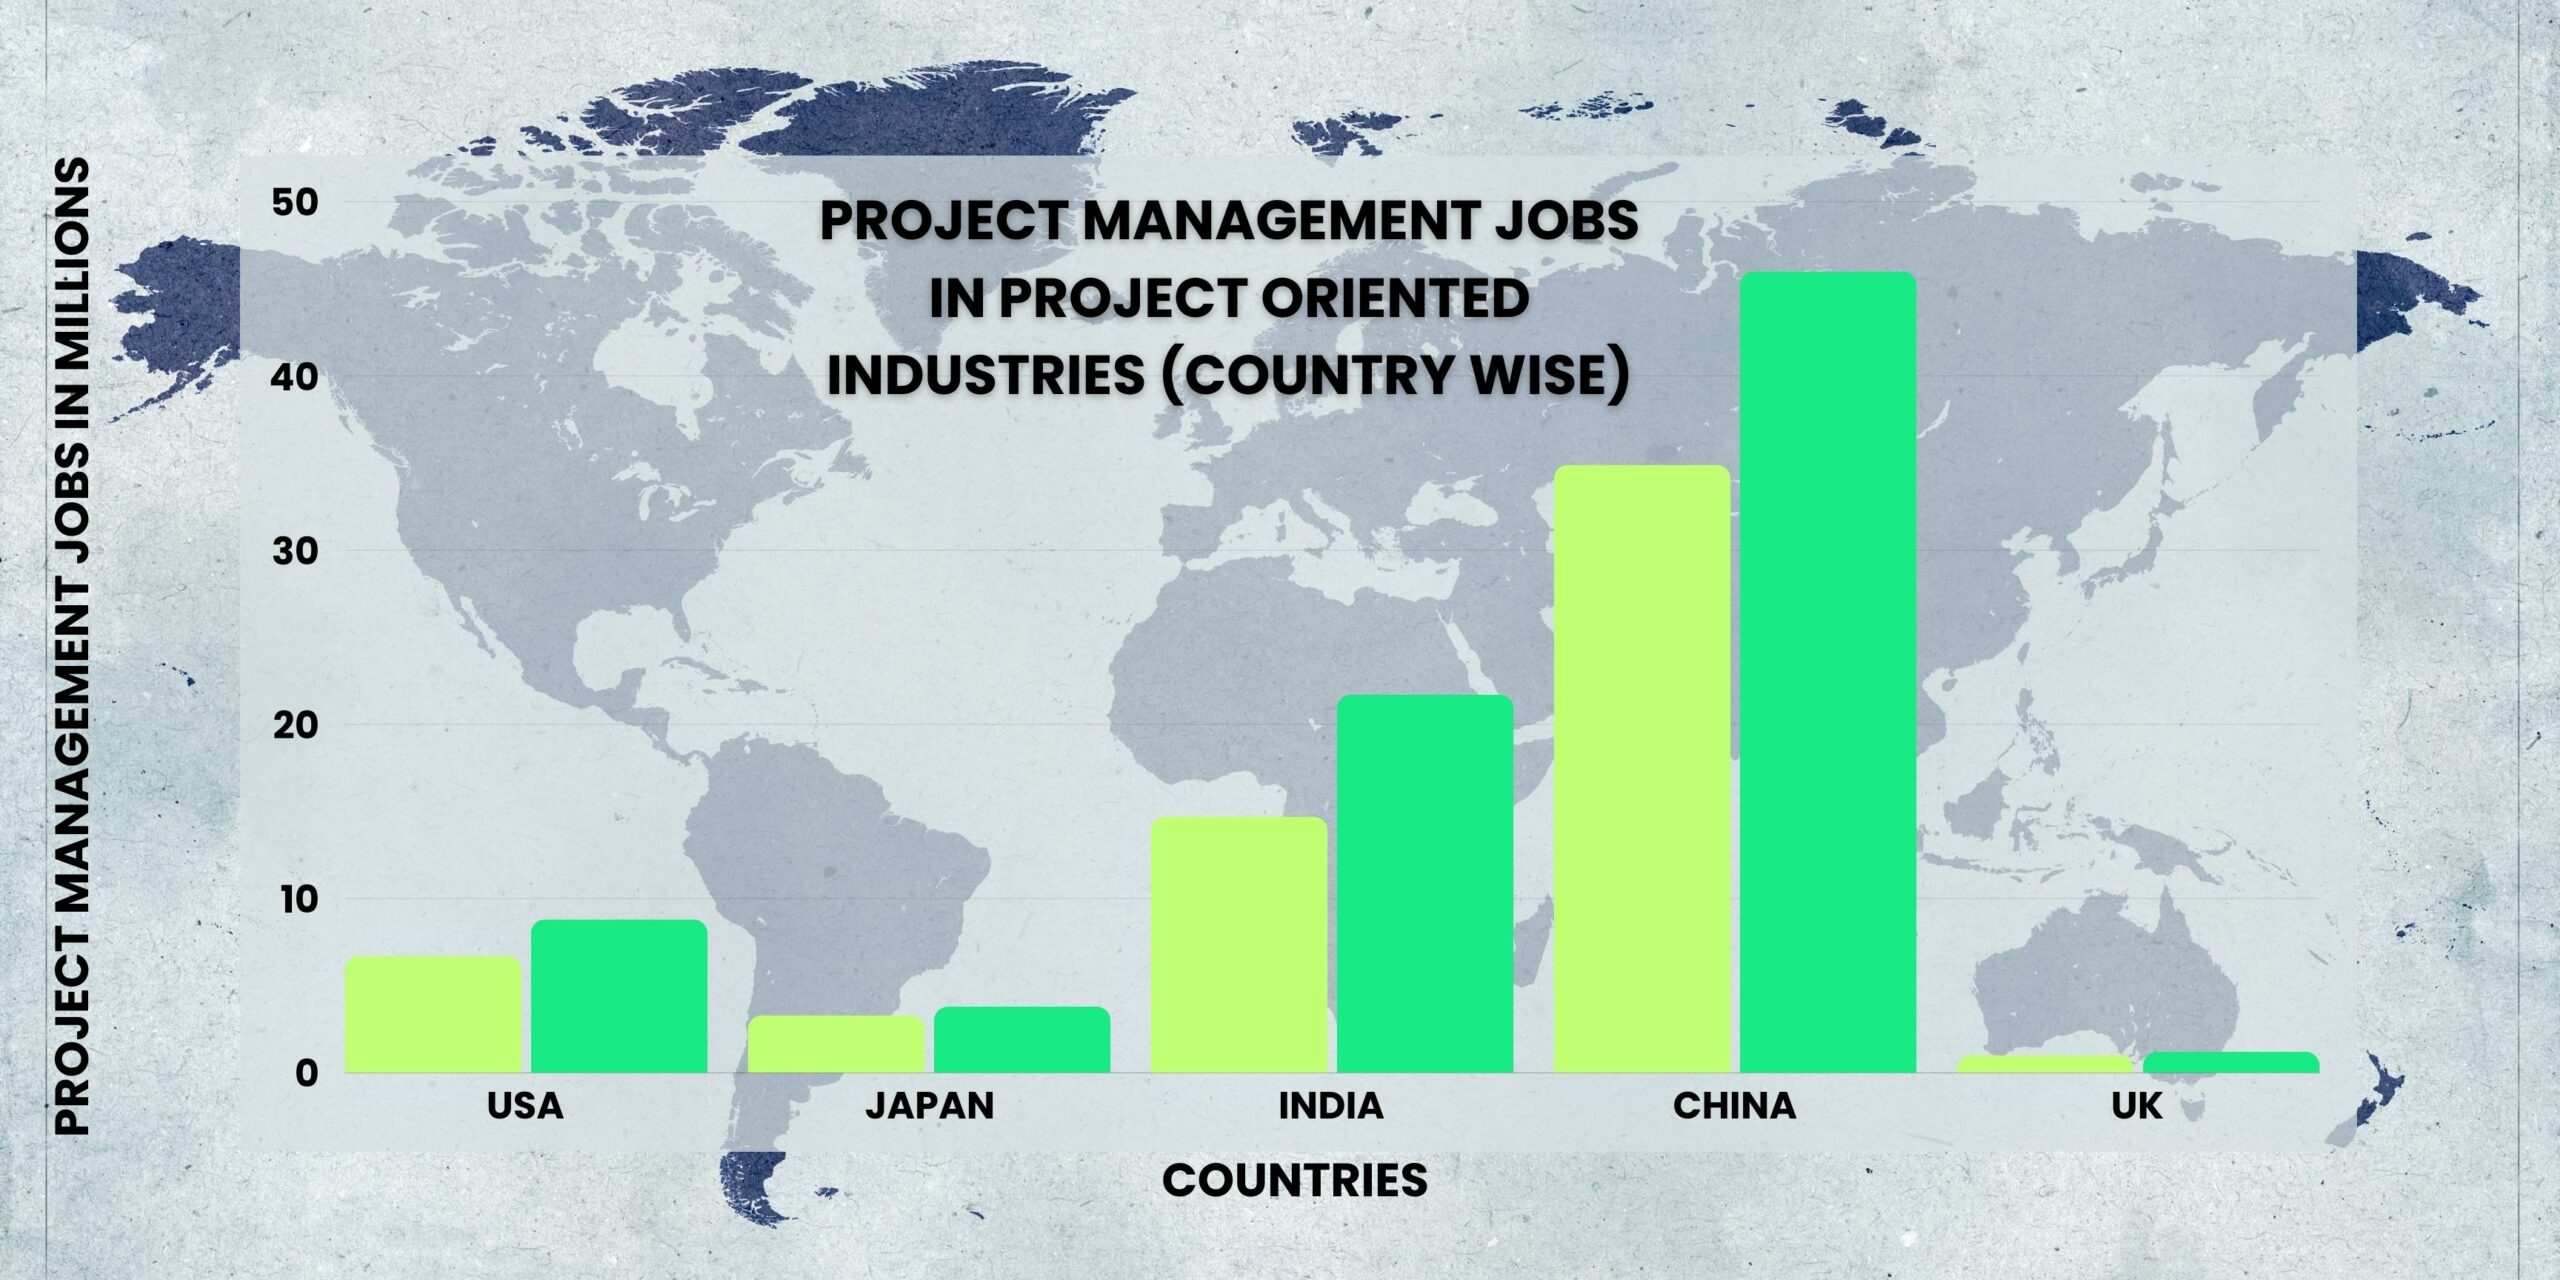 Project Management Jobs in Project Oriented Industries